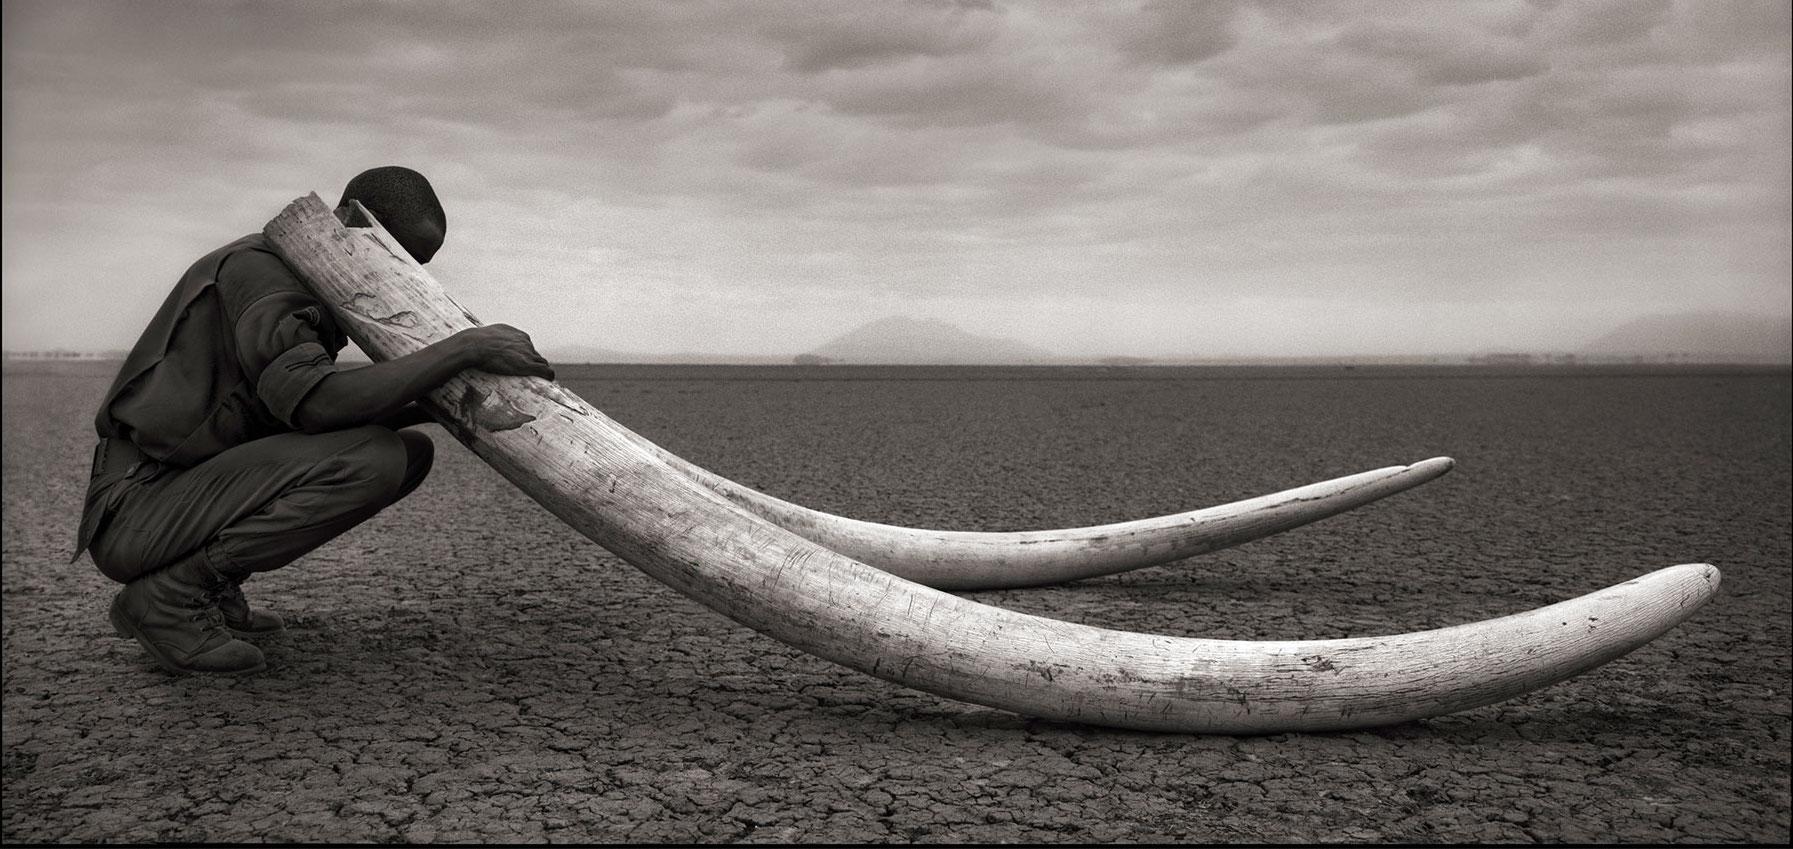 NICK BRANDT (*1966, England)
Ranger with Tusks of Killed Elephant, Amboseli
2011
Archival pigment print
Sheet 142.24 x 177.8 cm (56 x 70 in.)
Edition 8/10 (from a sold out edition)

Nick Brandt is a contemporary English photographer. His work